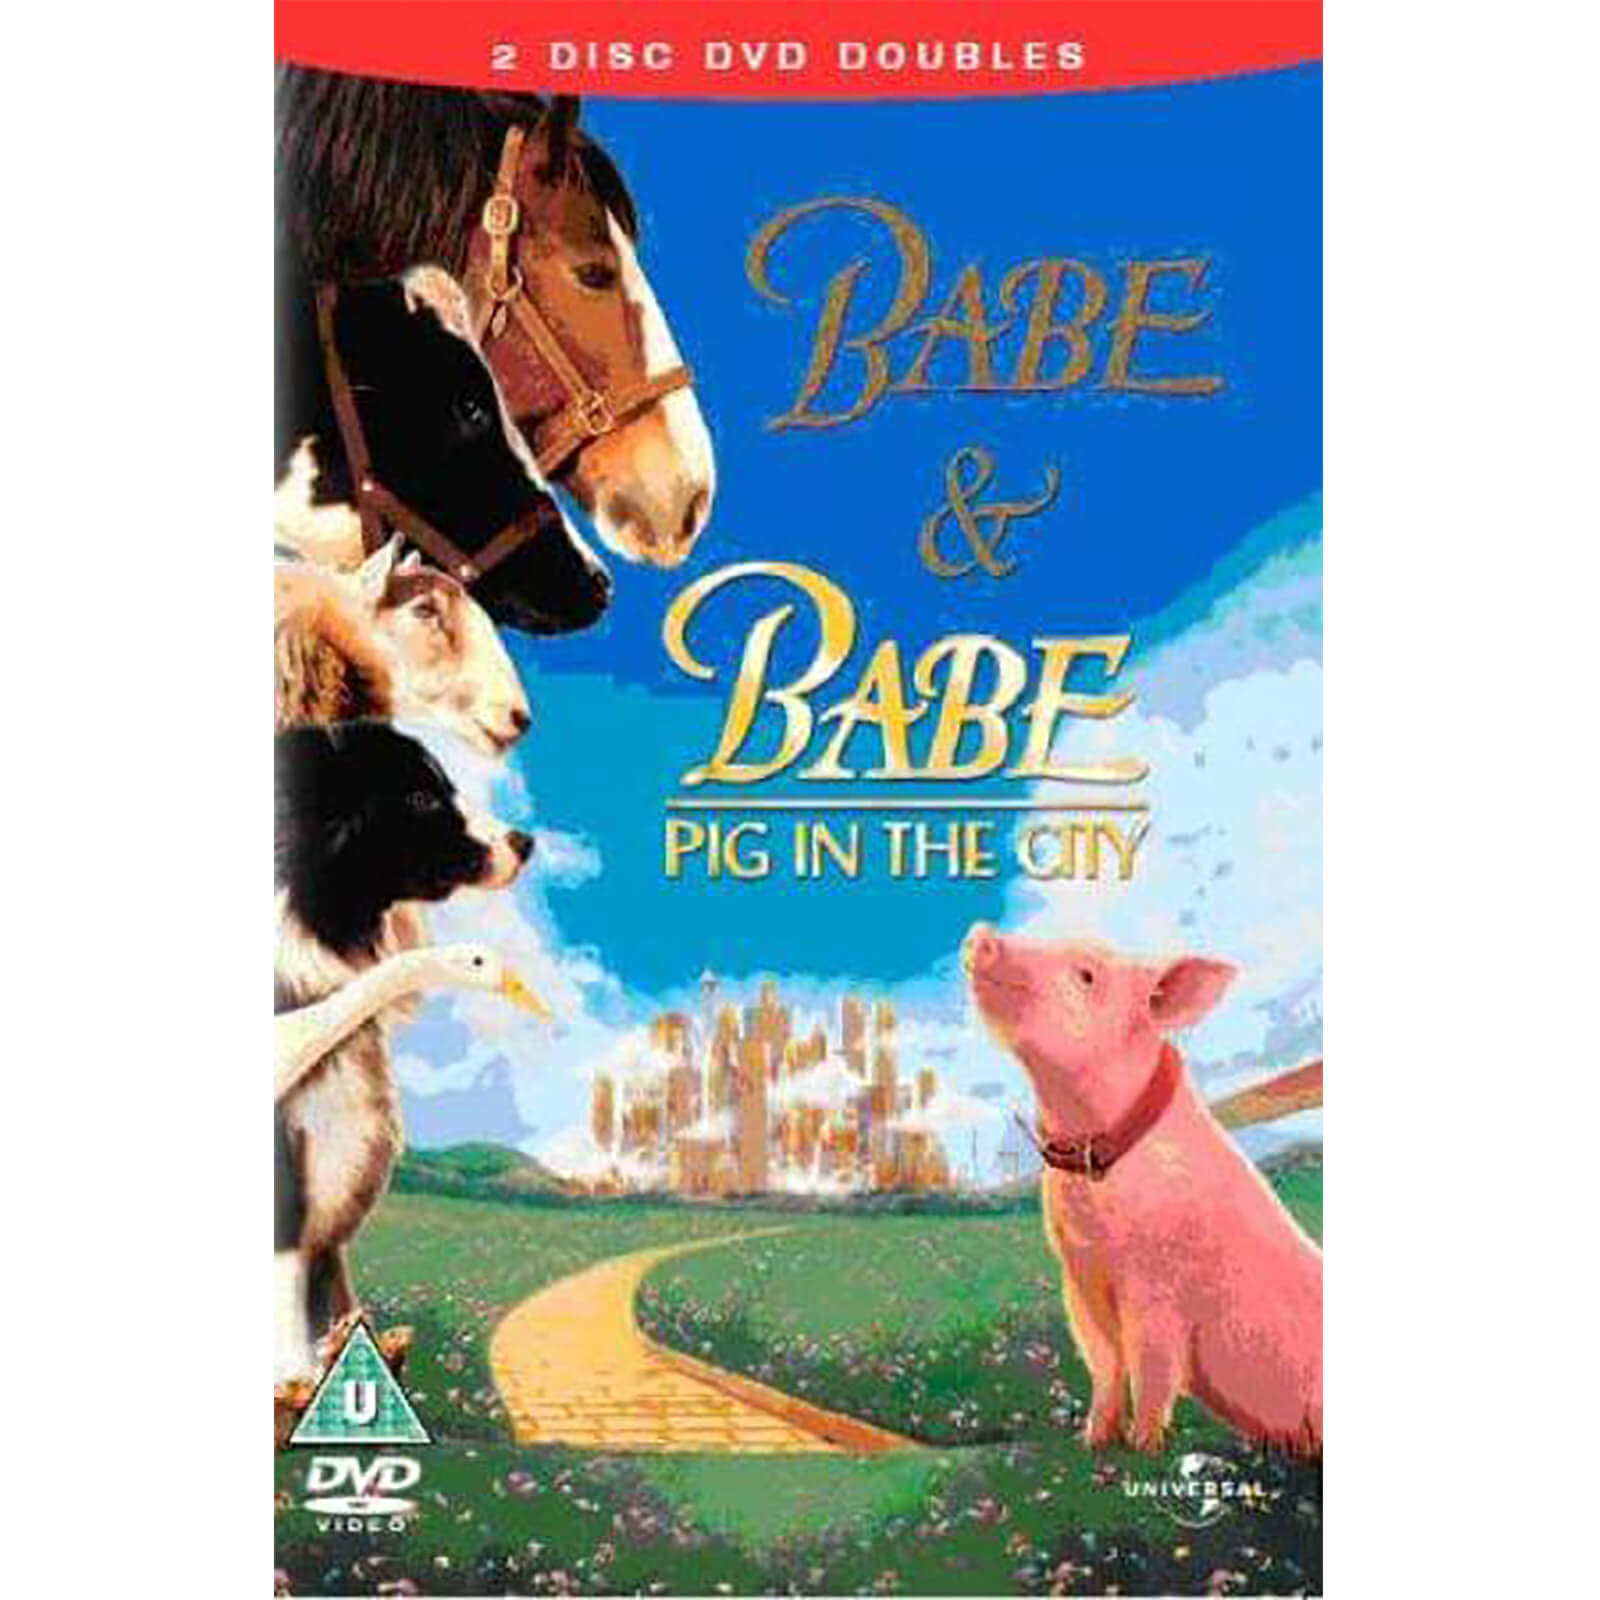 Babe / Babe 2:Pig In The City